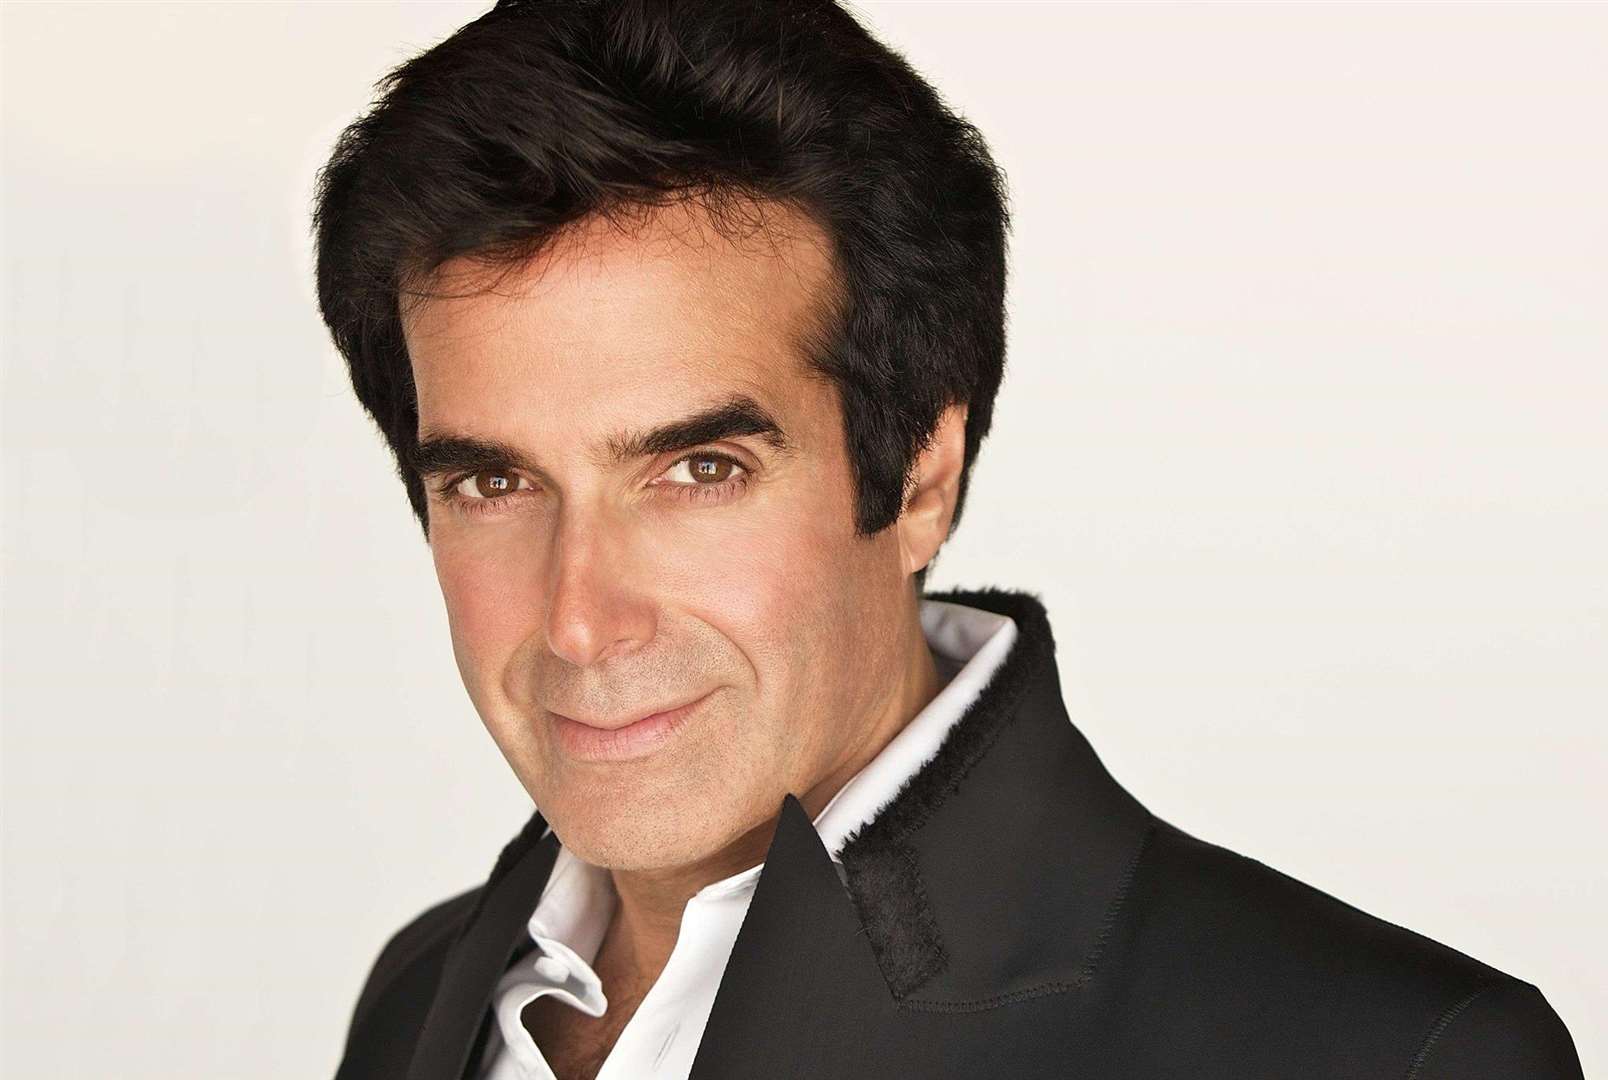 David Copperfield was forced to reveal one of his performance secrets